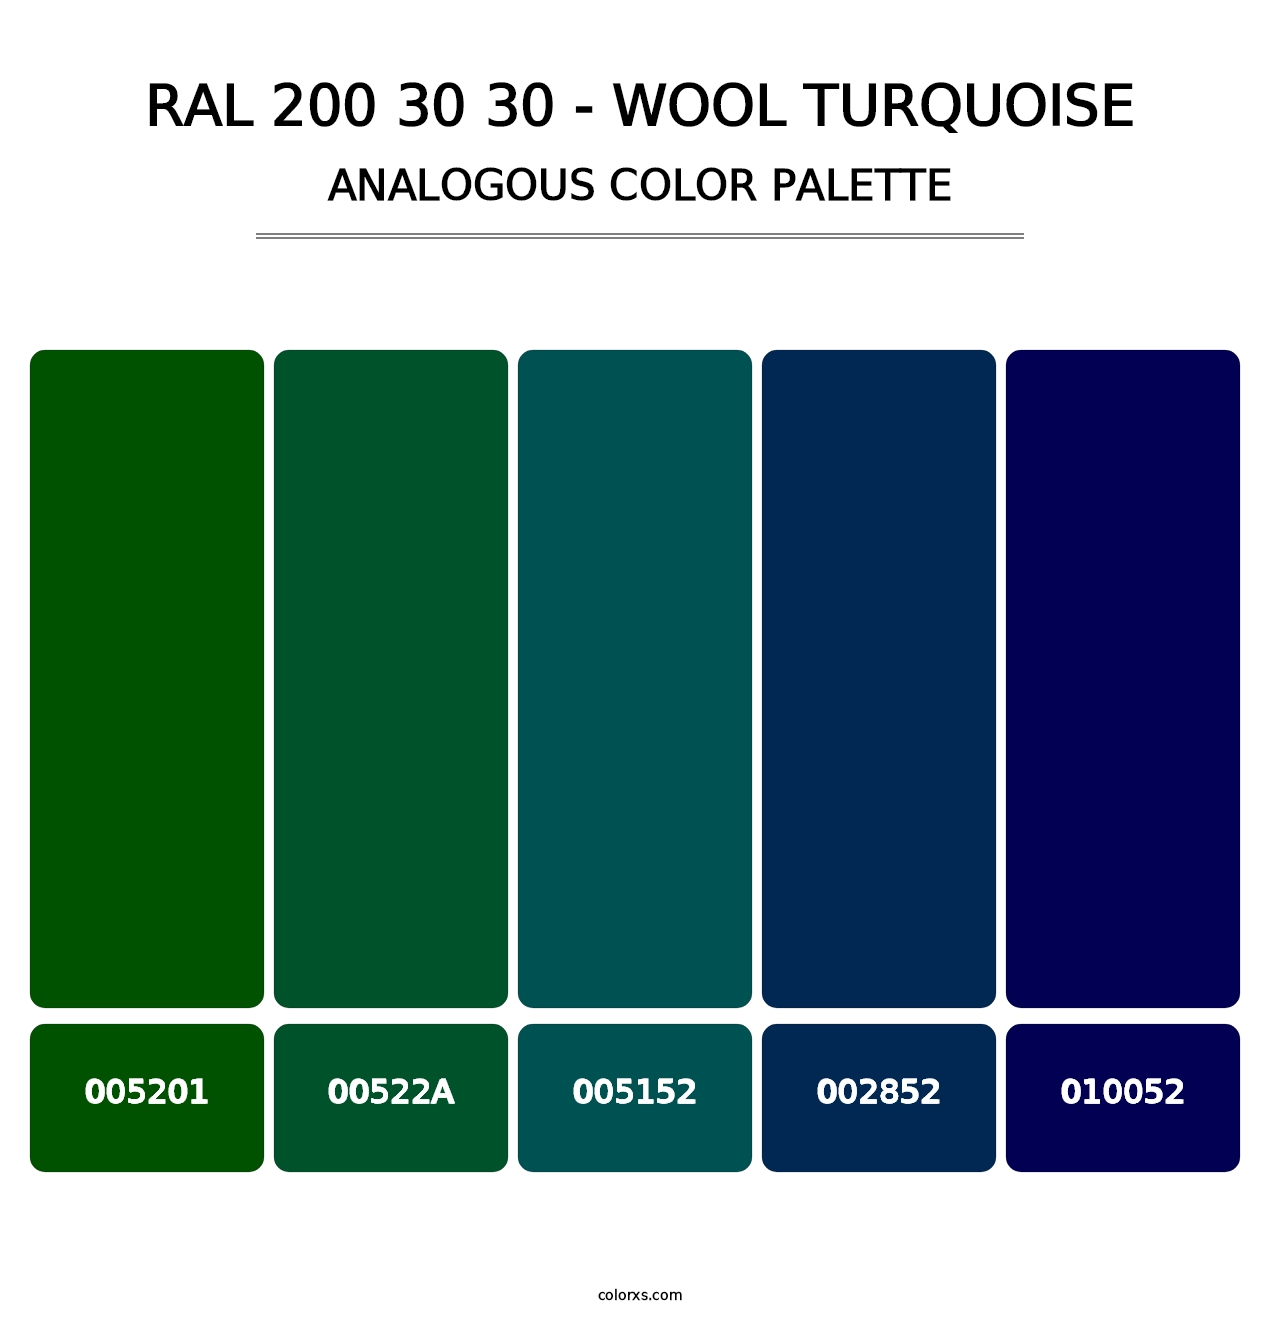 RAL 200 30 30 - Wool Turquoise - Analogous Color Palette